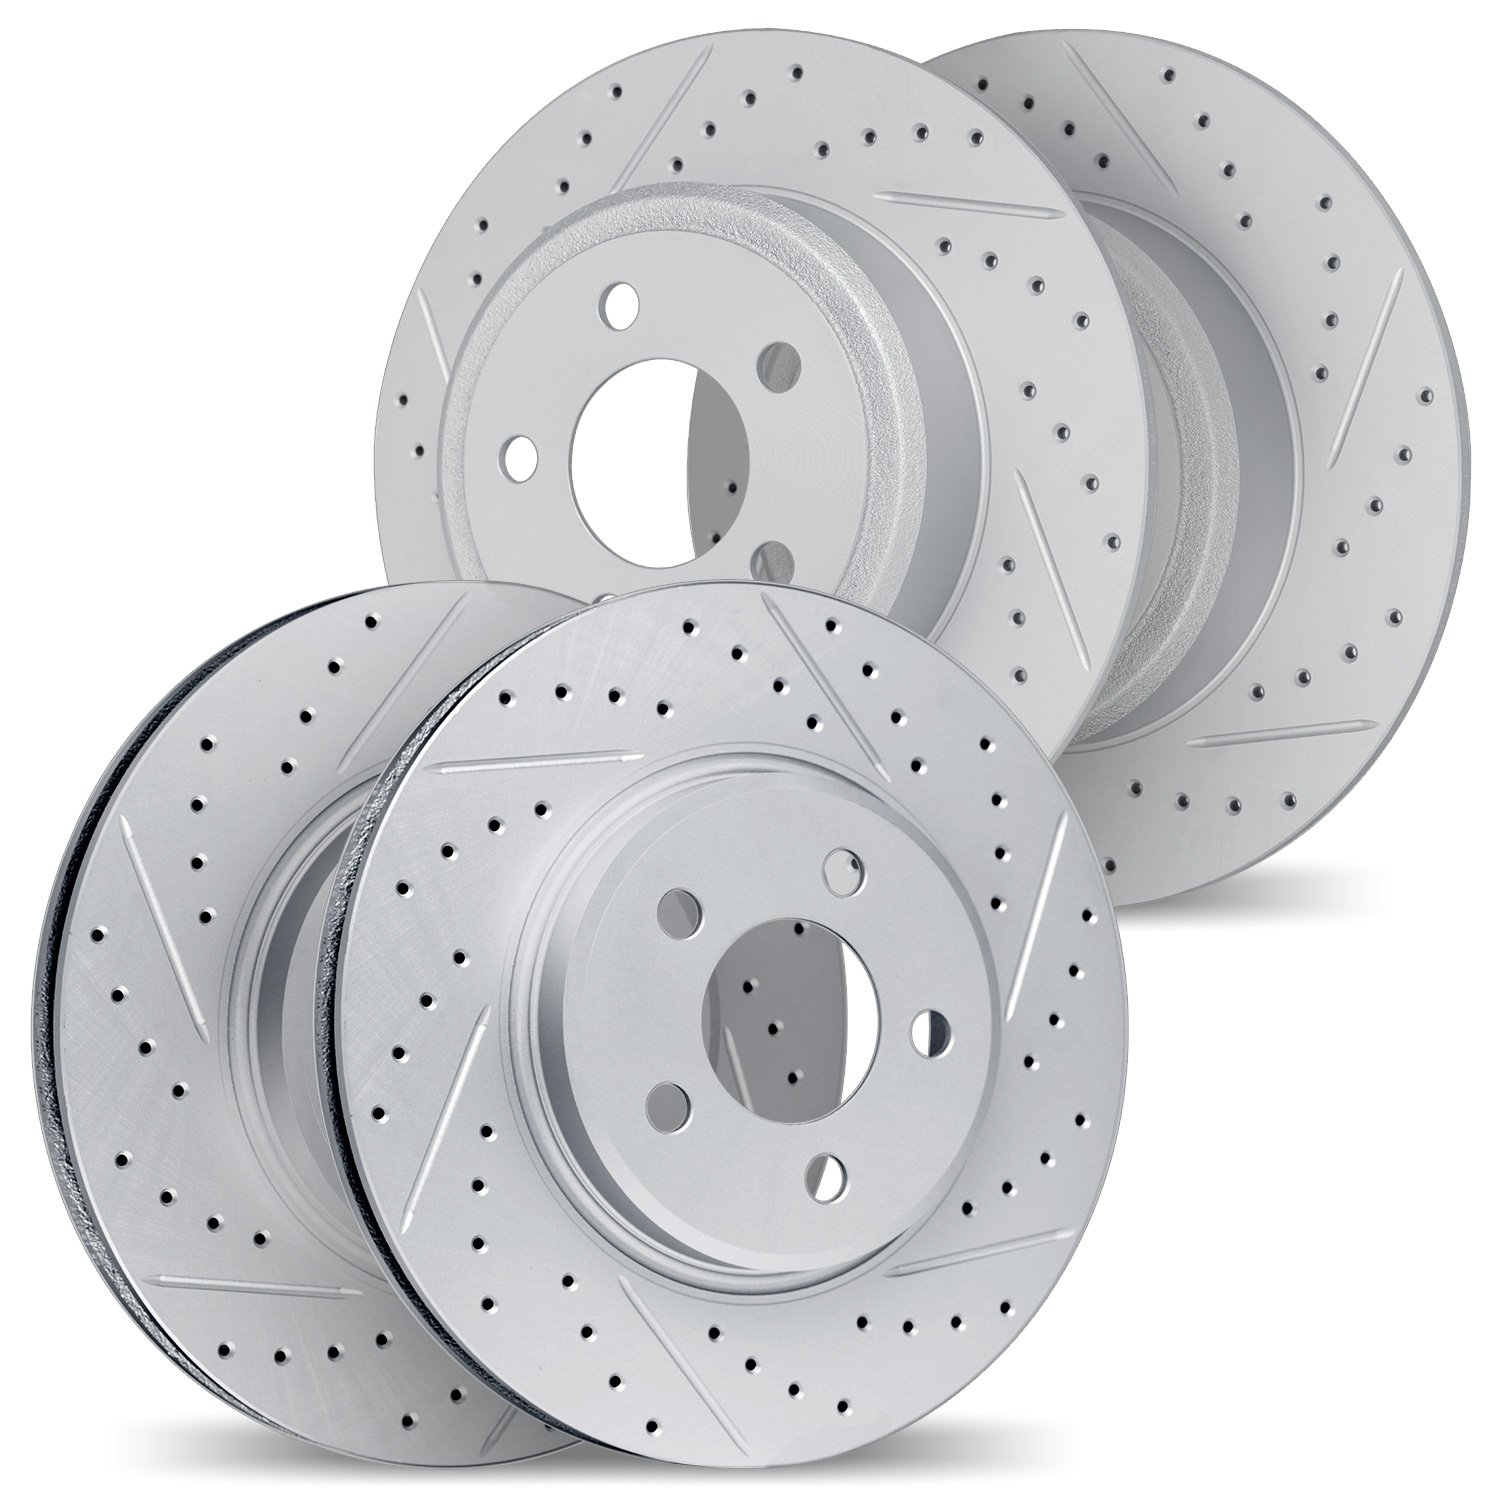 2004-13028 Geoperformance Drilled/Slotted Brake Rotors, 2012-2016 Subaru, Position: Front and Rear